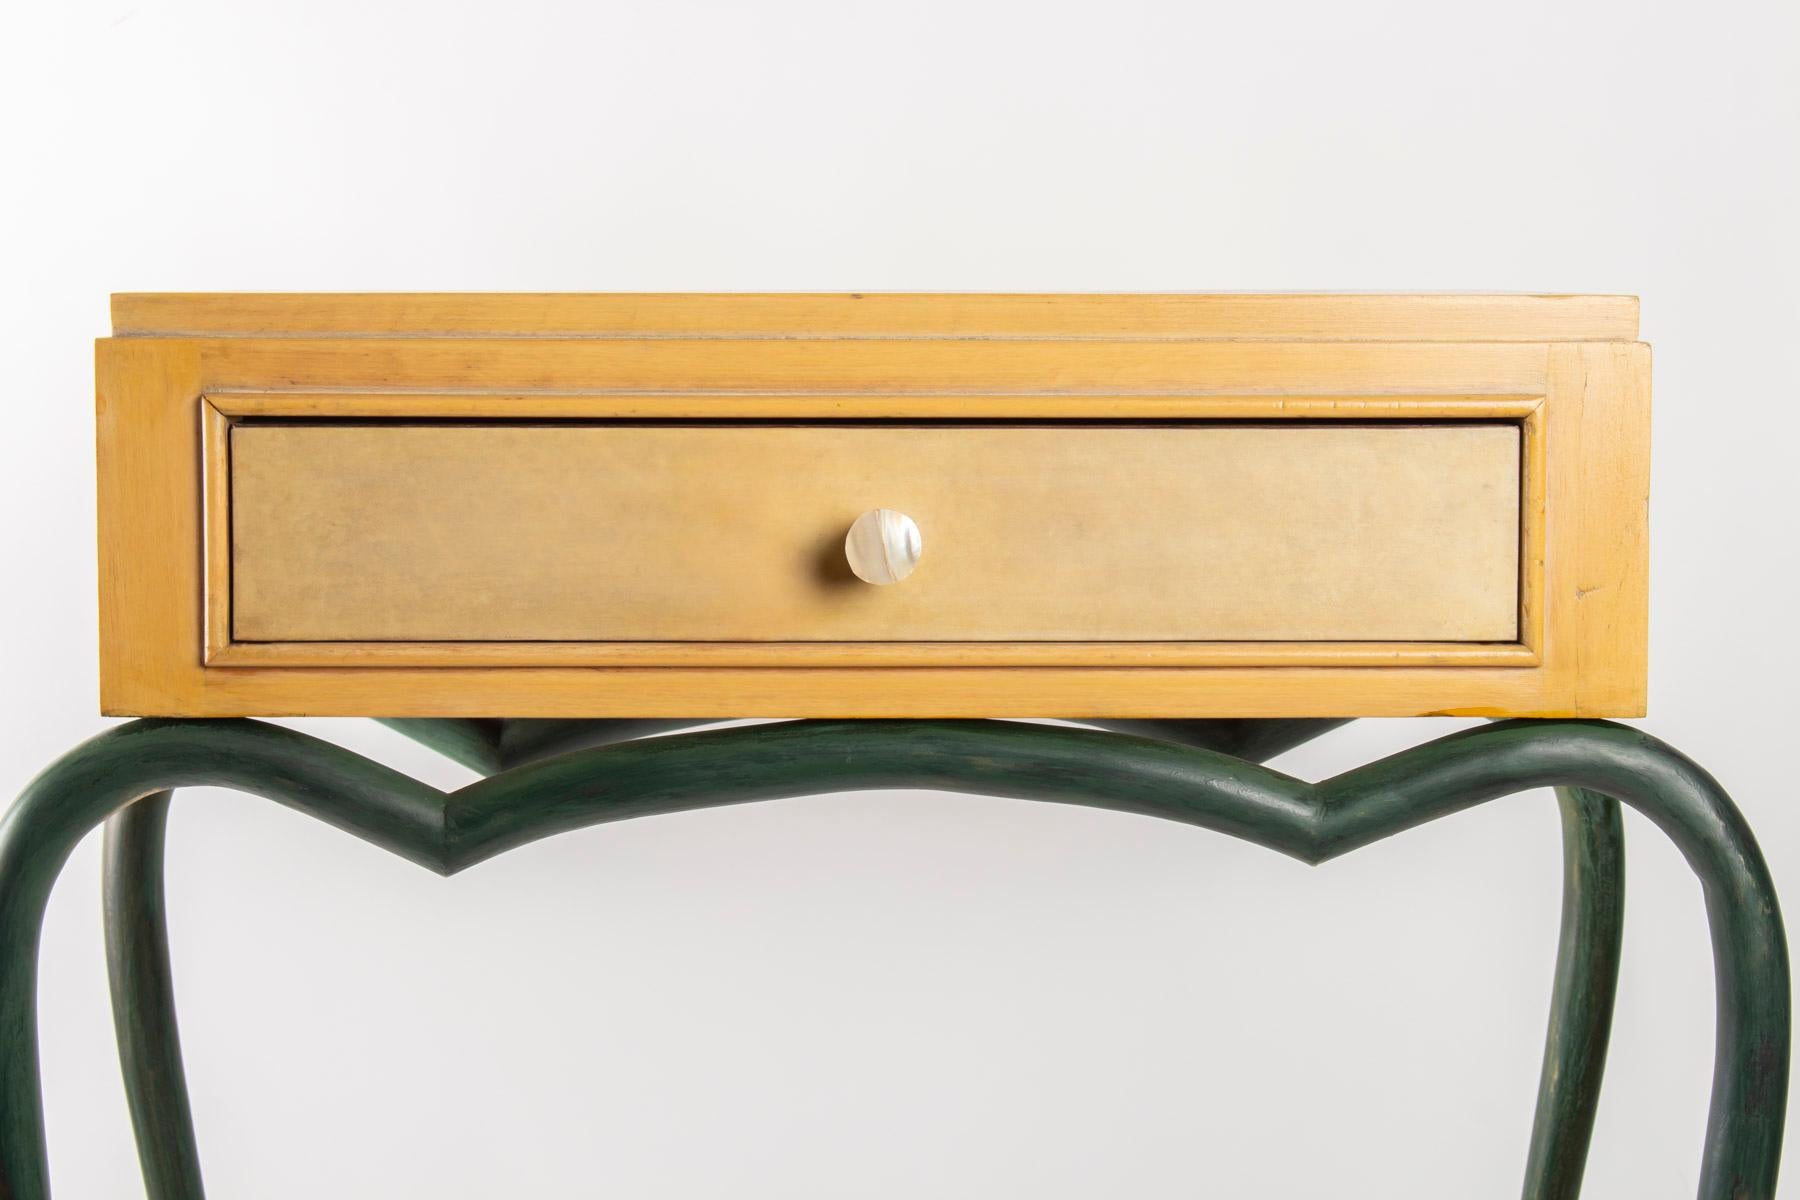 French Console 1940 René Prou in Sycamore and Patinated Wrought Iron, Parchment Drawer